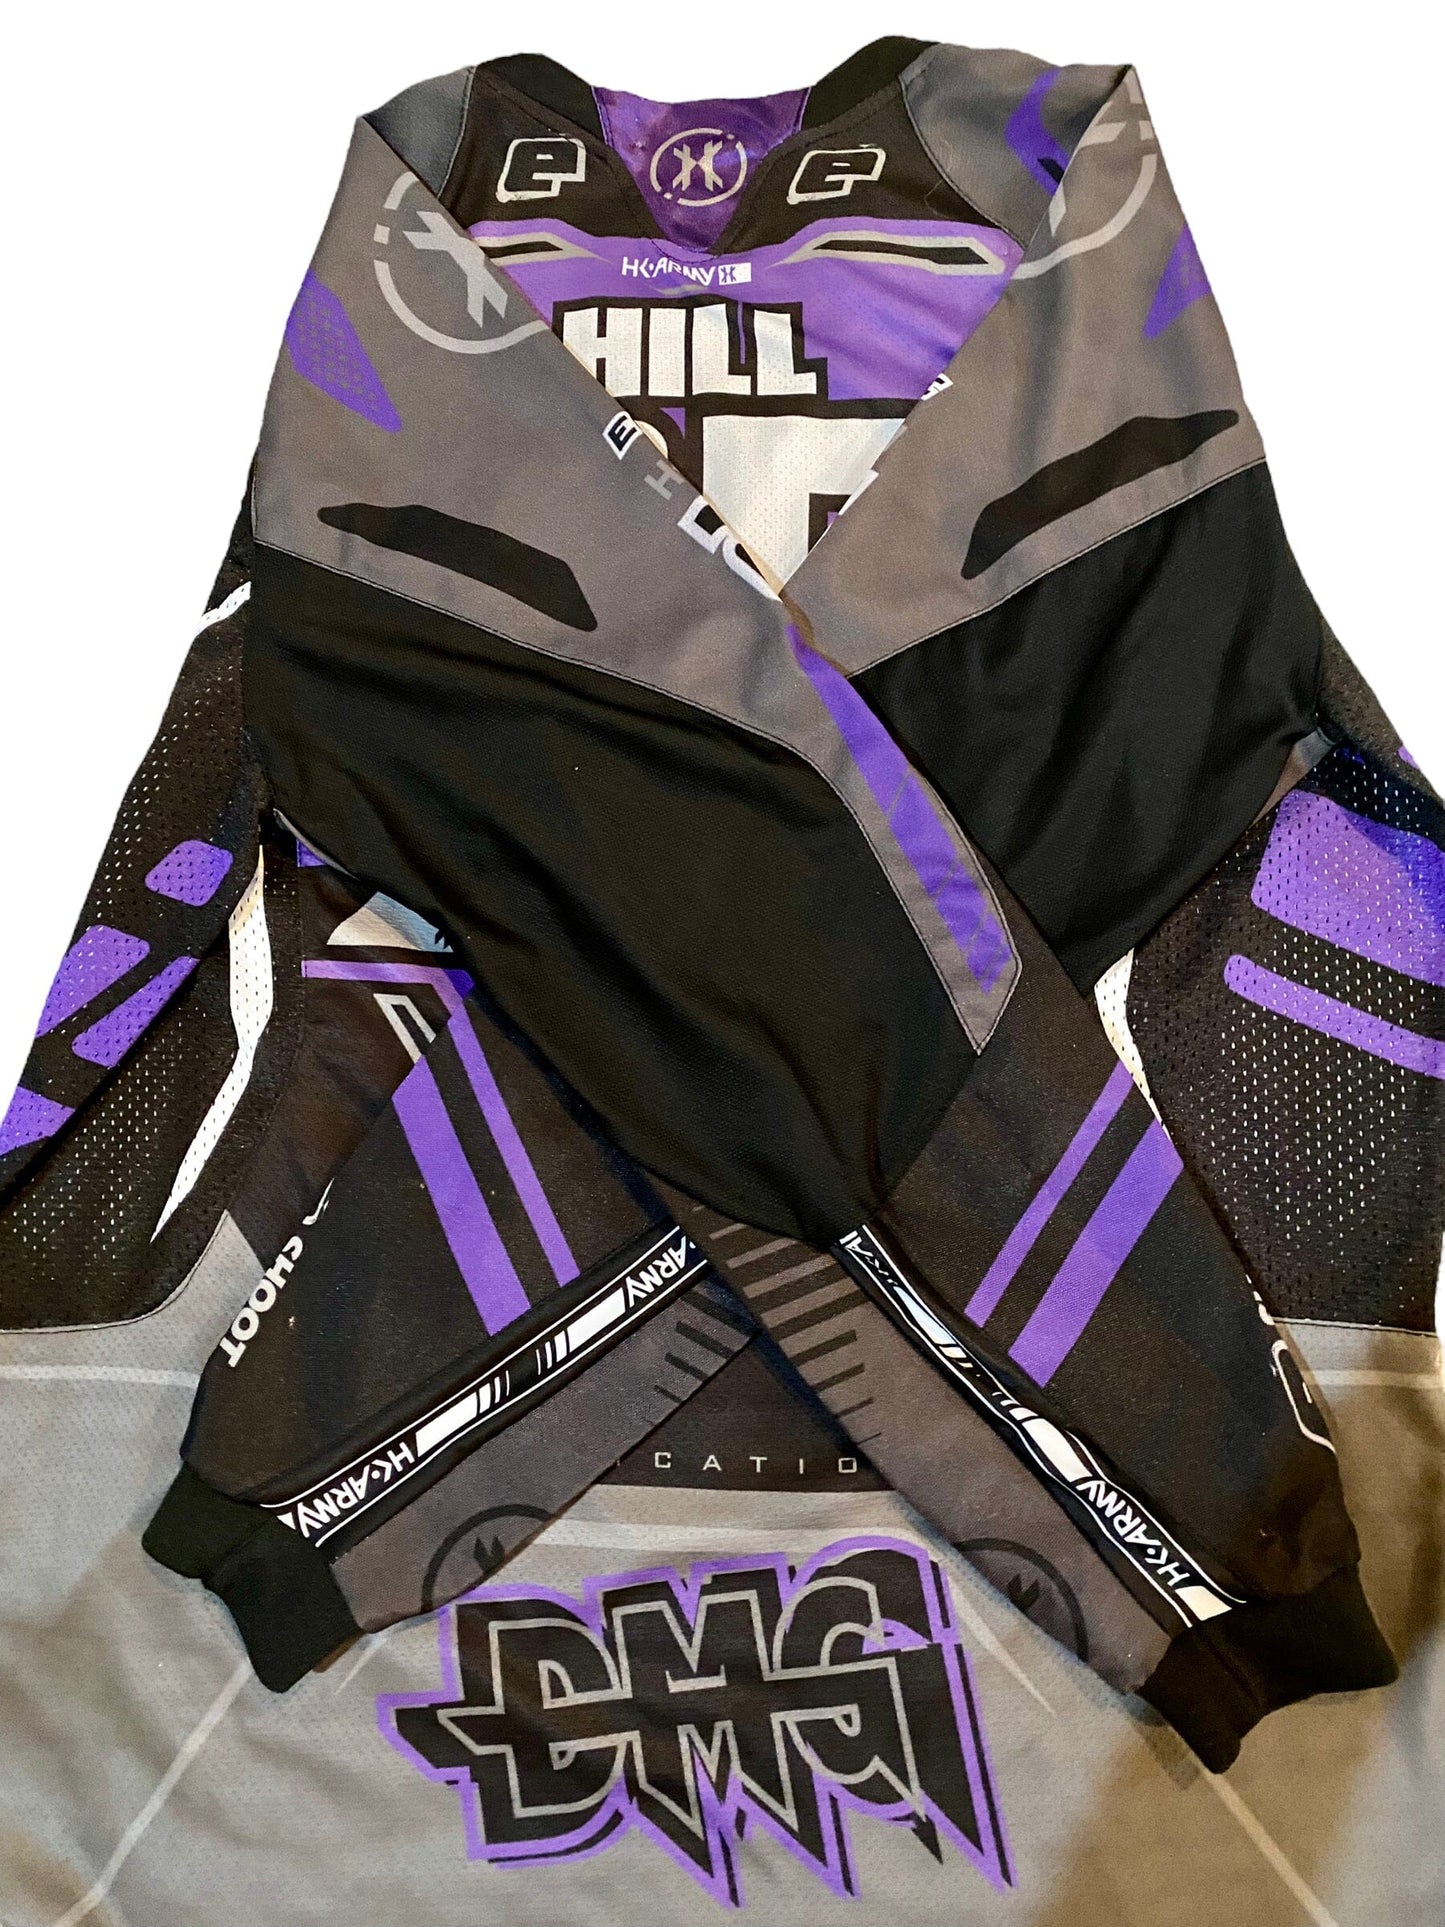 Used Sacramento DMG Pro Paintball Jersey - size XL Paintball Gun from CPXBrosPaintball Buy/Sell/Trade Paintball Markers, Paintball Hoppers, Paintball Masks, and Hormesis Headbands